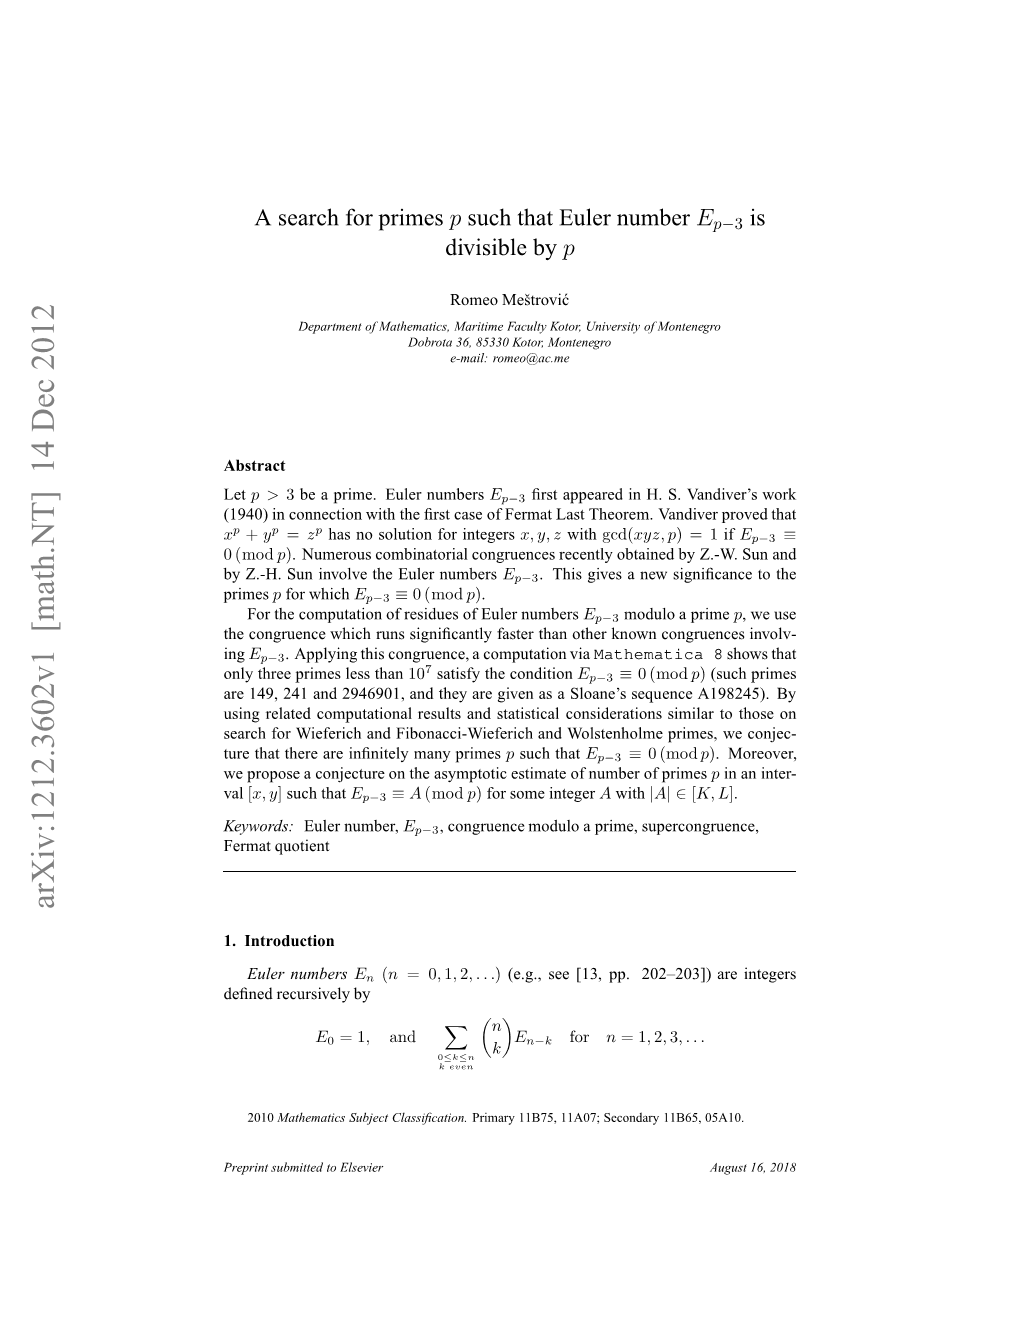 A Search for Primes $ P $ Such That Euler Number $ E {P-3} $ Is